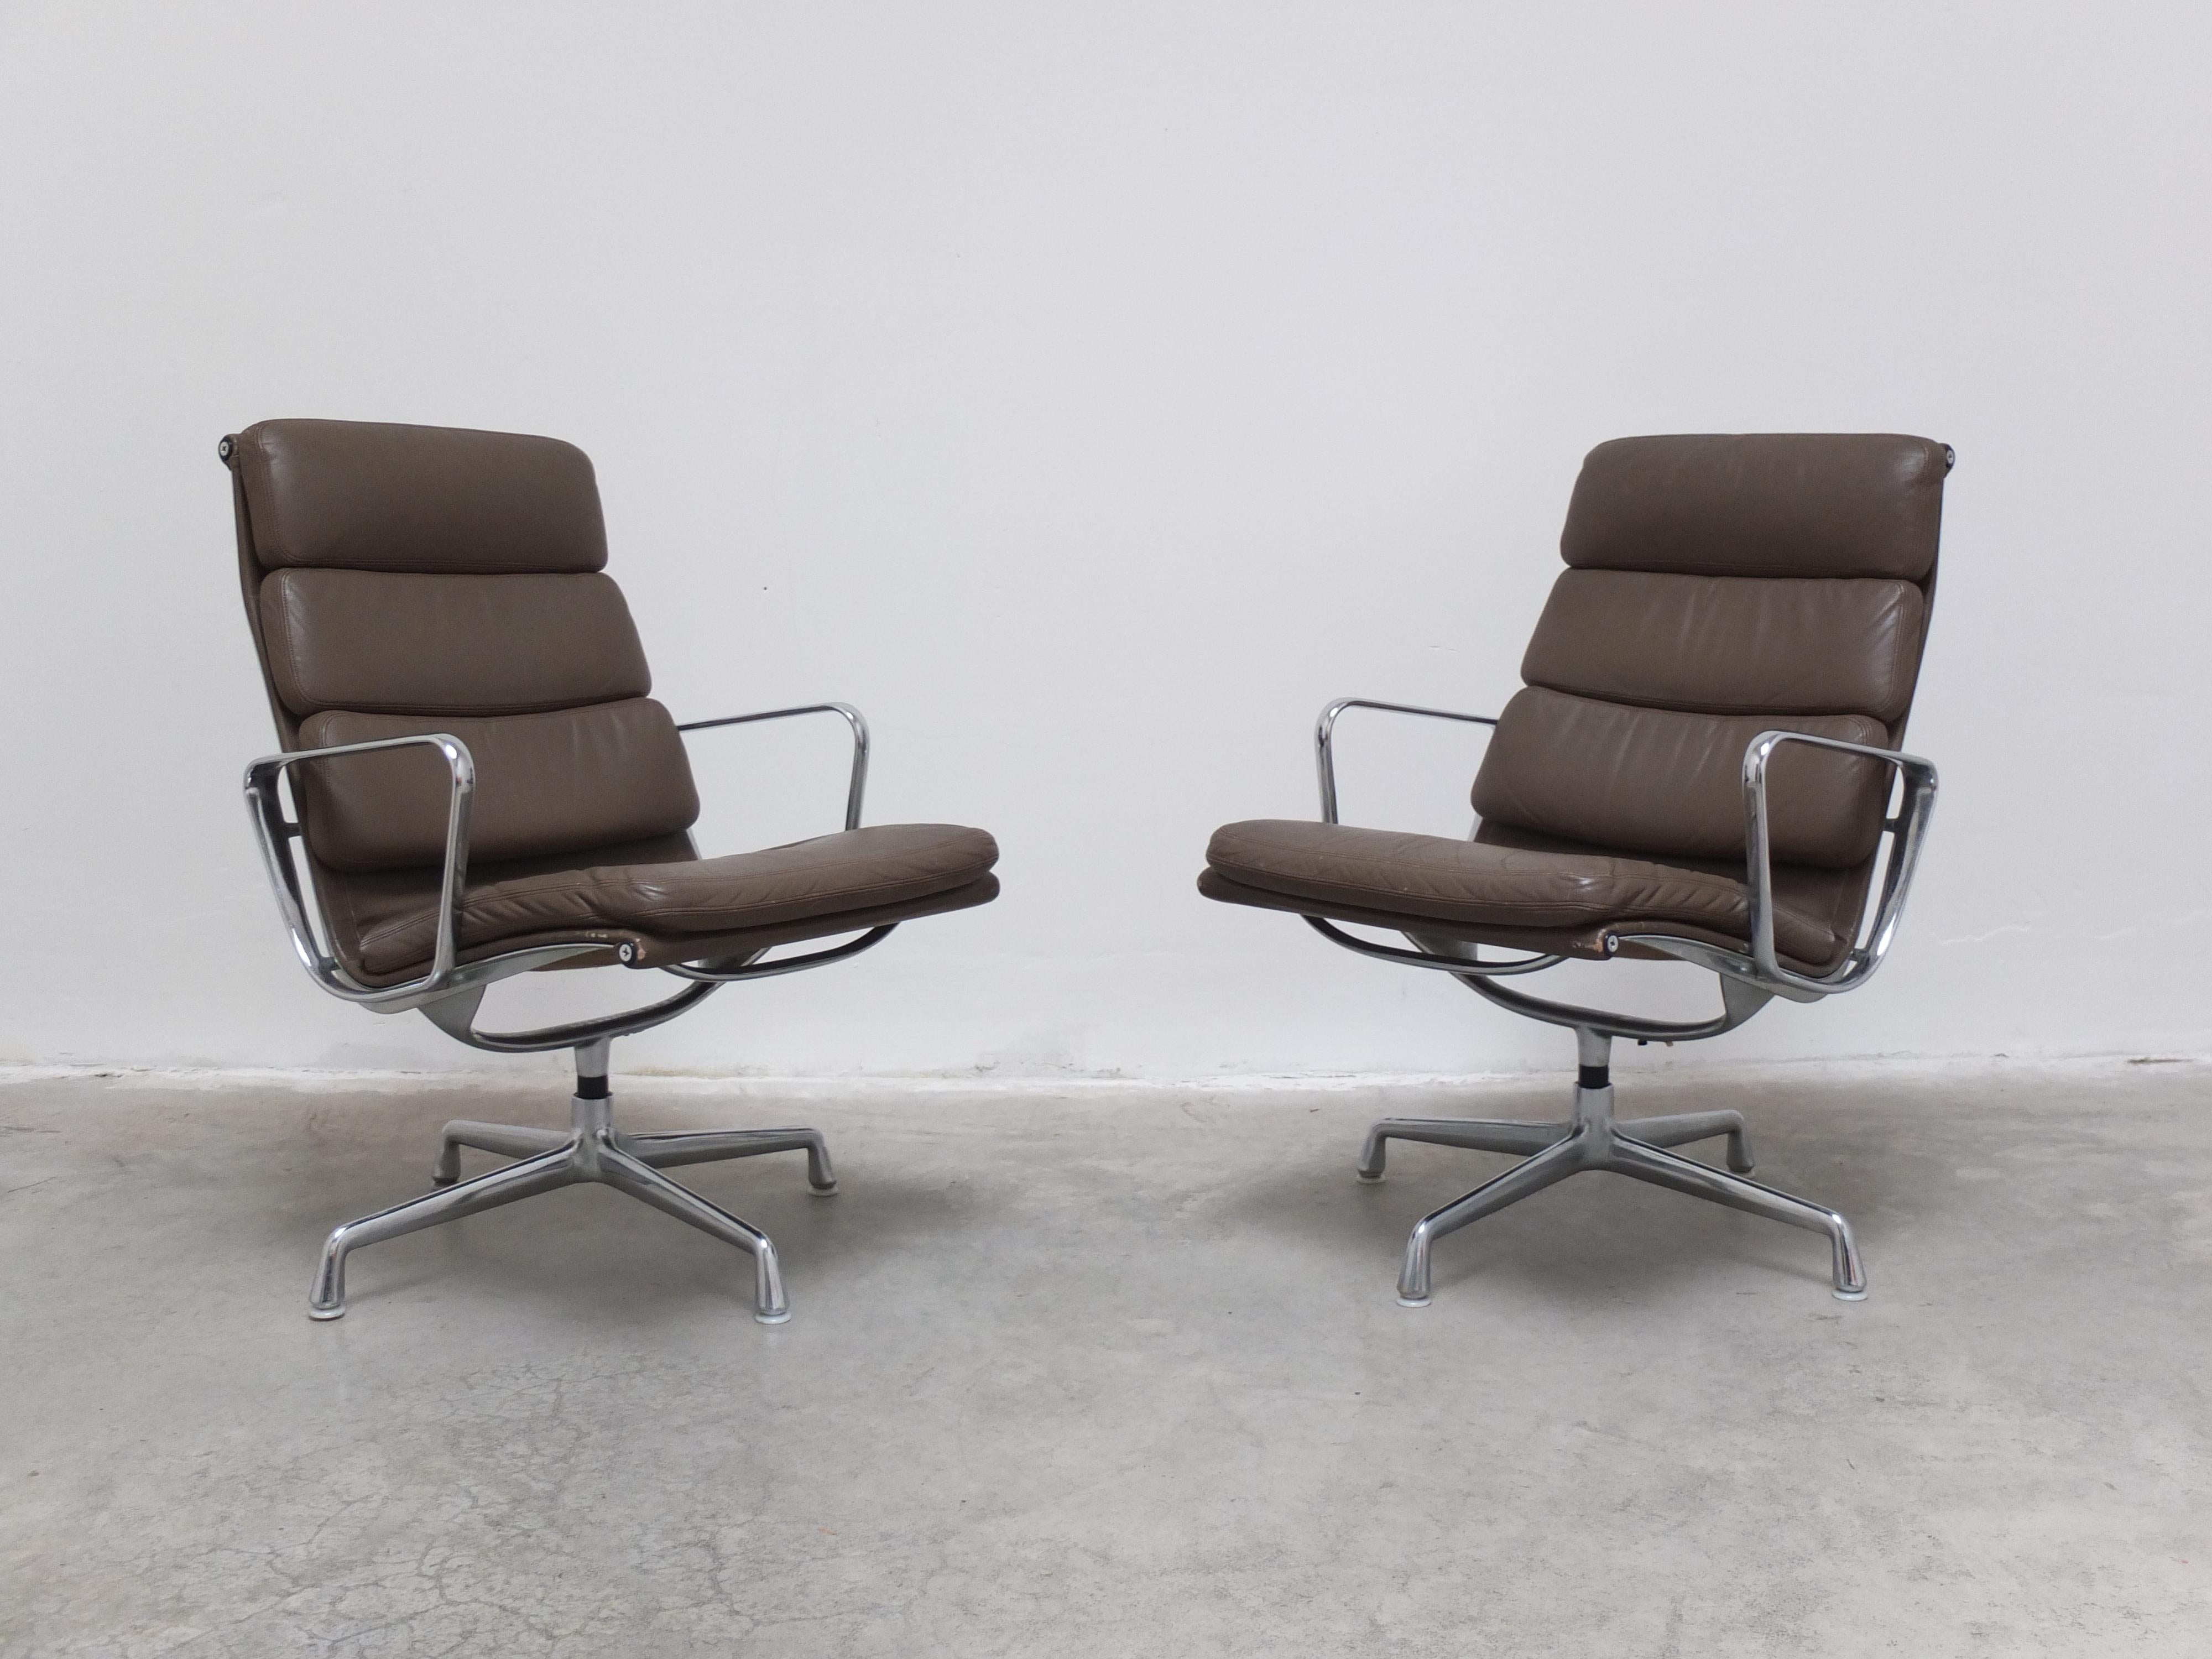 Early Pair of 'EA216' Chairs by Charles & Ray Eames for Herman Miller, 1970s For Sale 3